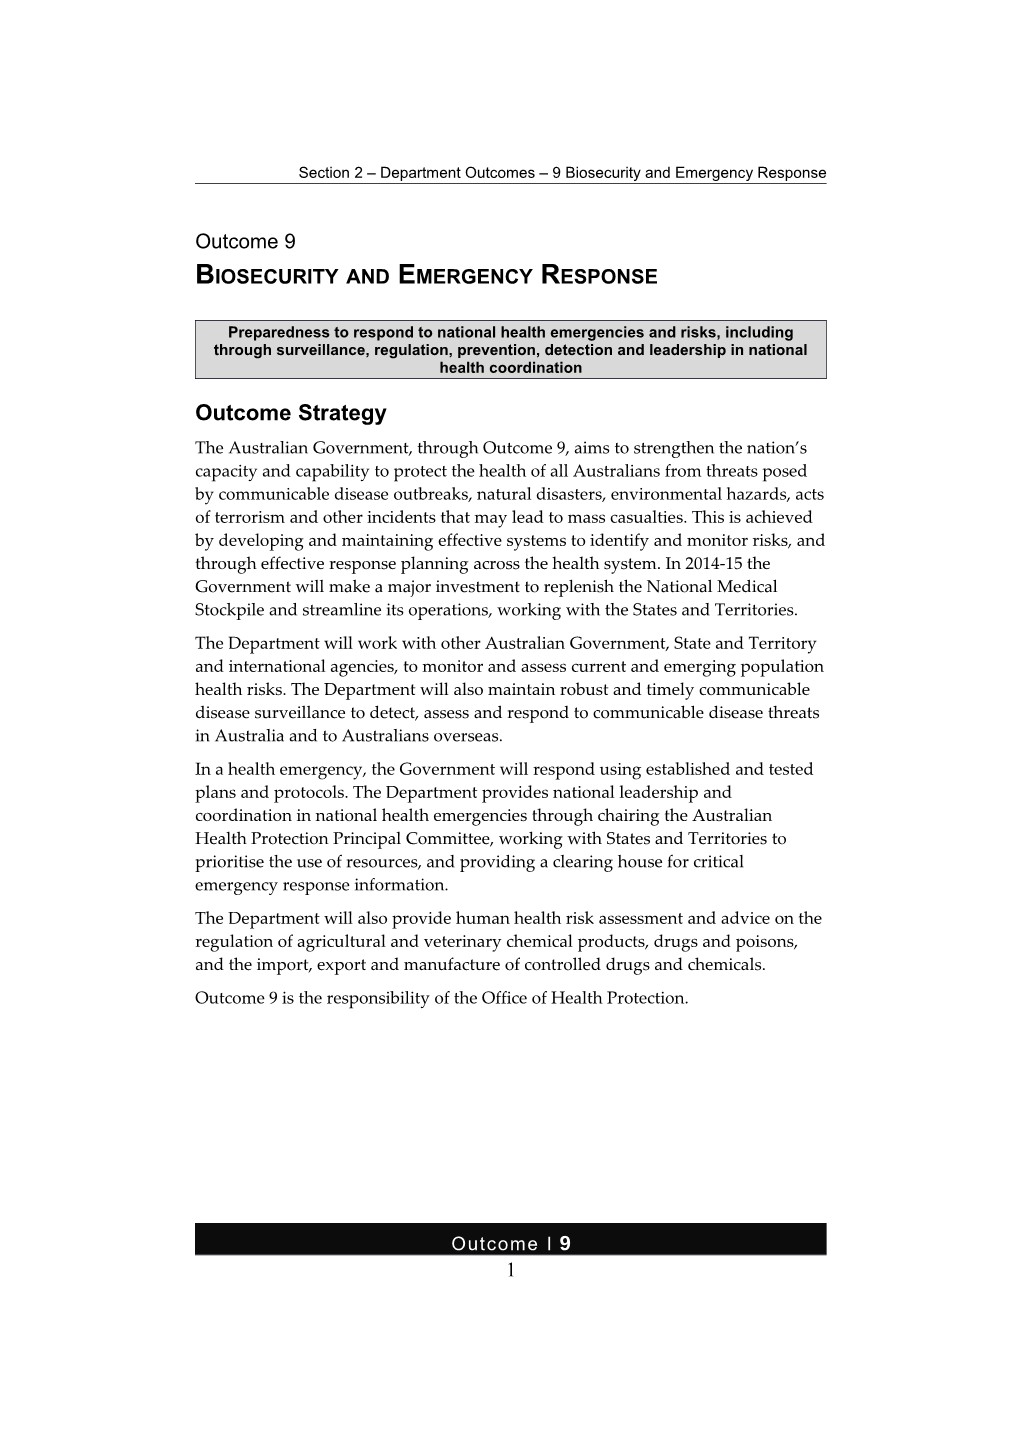 Outcome 9 BIOSECURITY and EMERGENCY RESPONSE